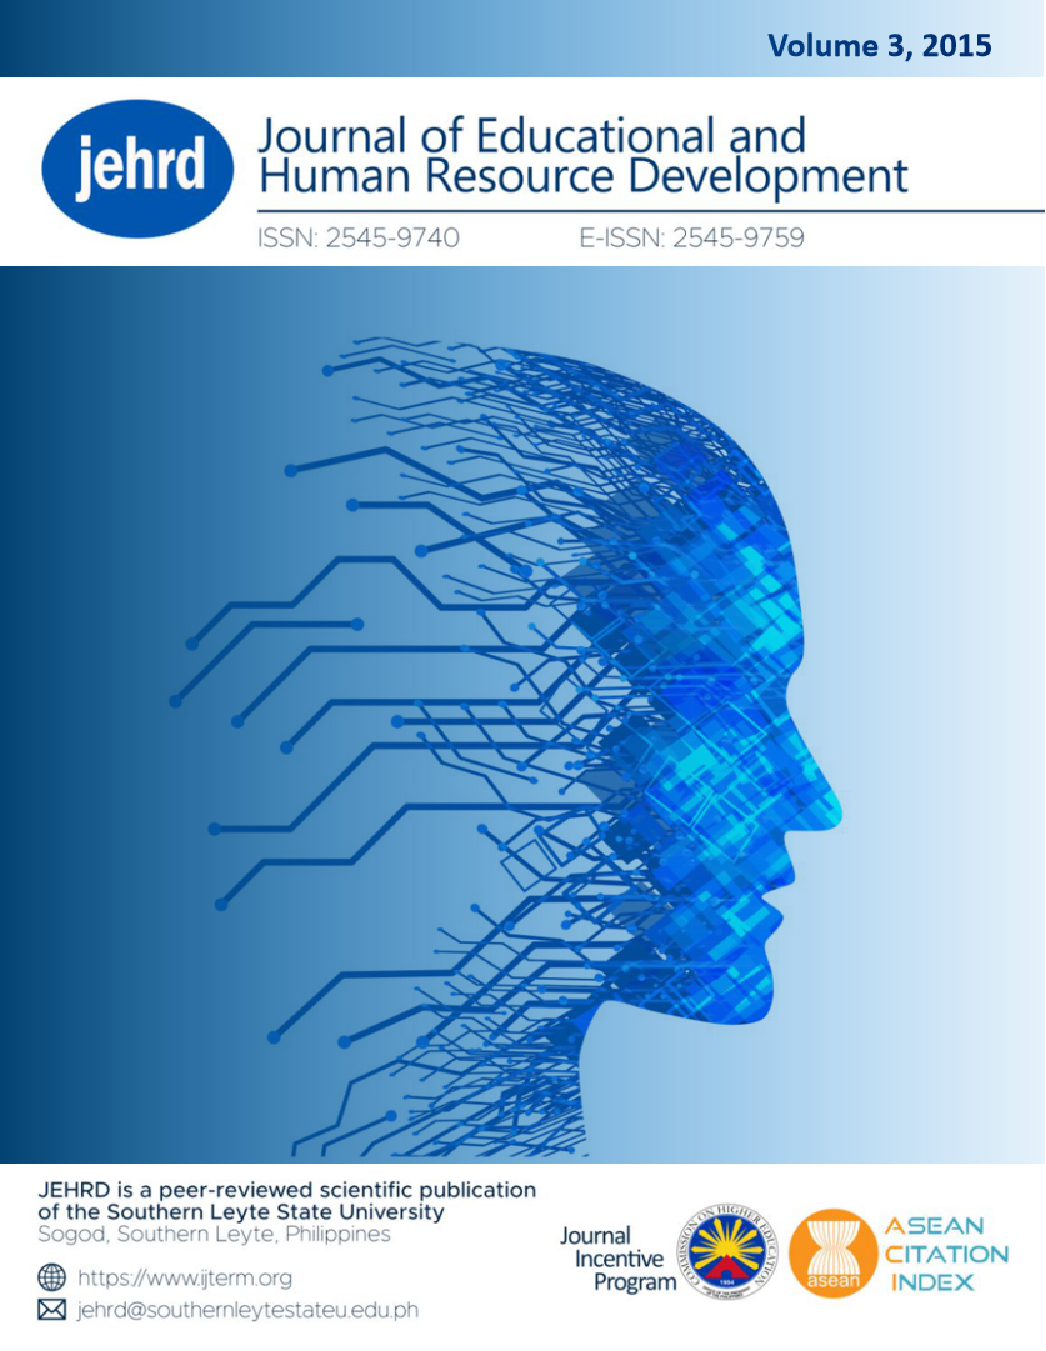 					View Vol. 3 (2015):  Journal of Educational and Human Resource Development
				